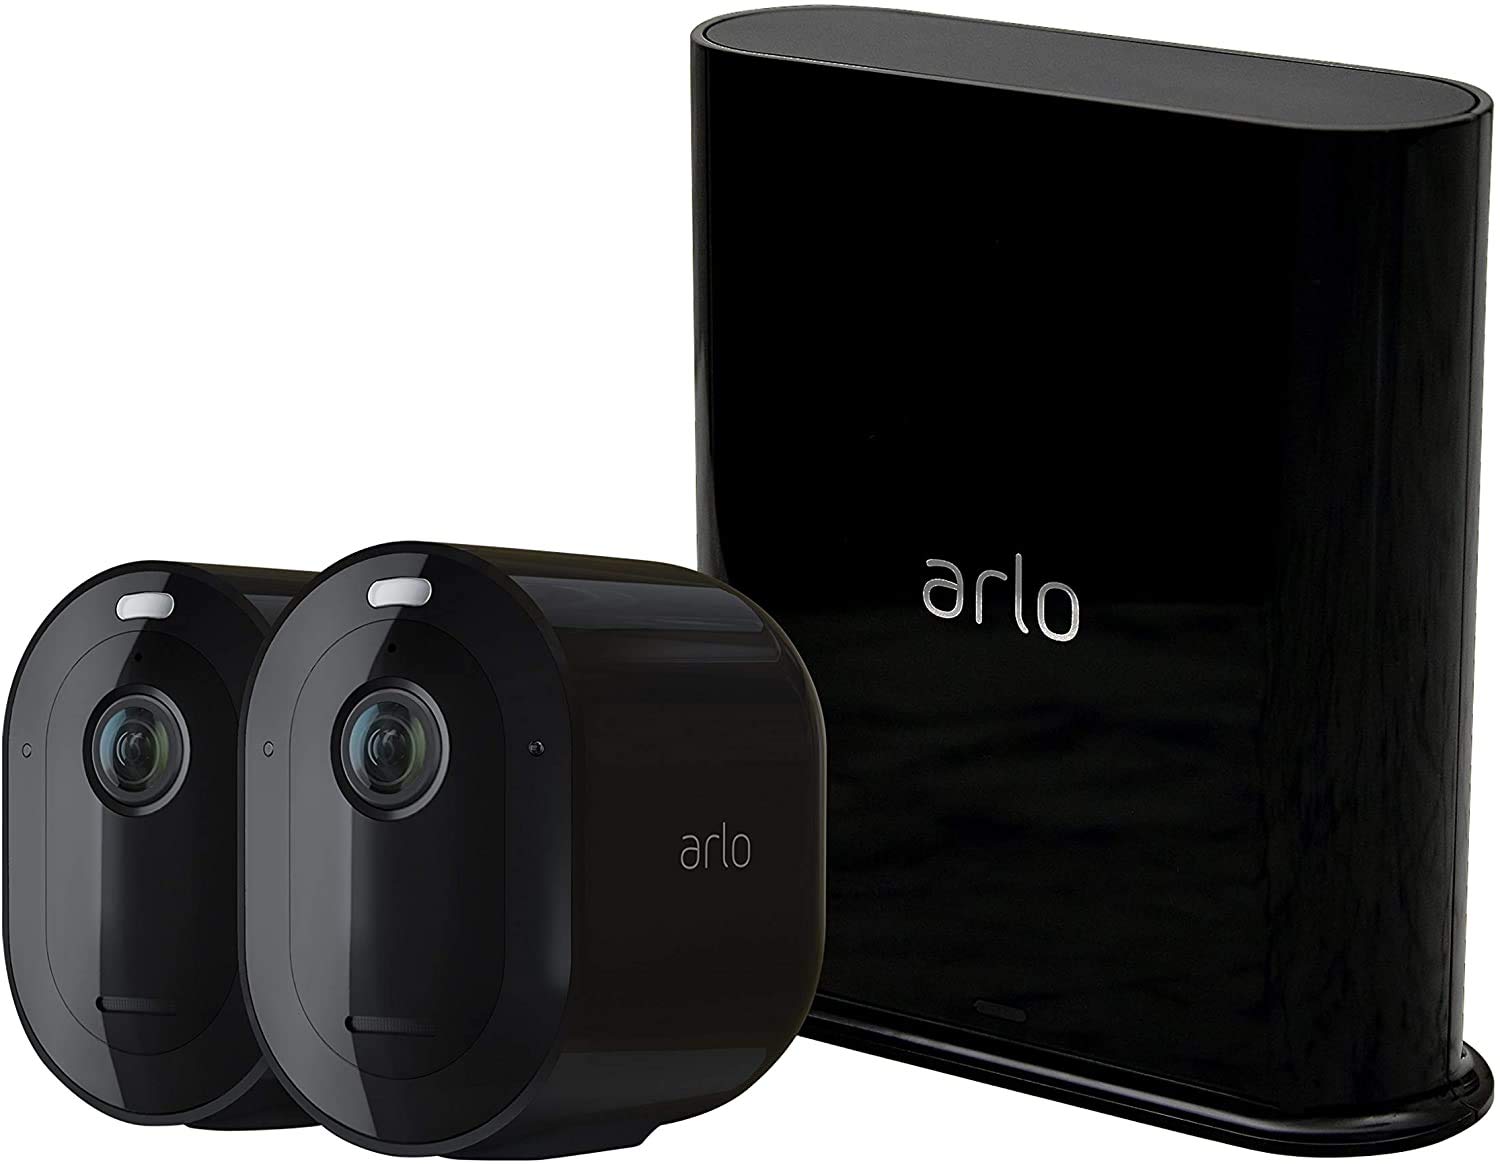 Arlo Pro3 Wireless Outdoor Home Security Camera System CCTV, 6-Month Battery, Colour Night Vision, 2K HDR, 2-Way Audio, Alarm, 2 Camera kit, With 90-day free trial of Arlo Secure Plan, Black